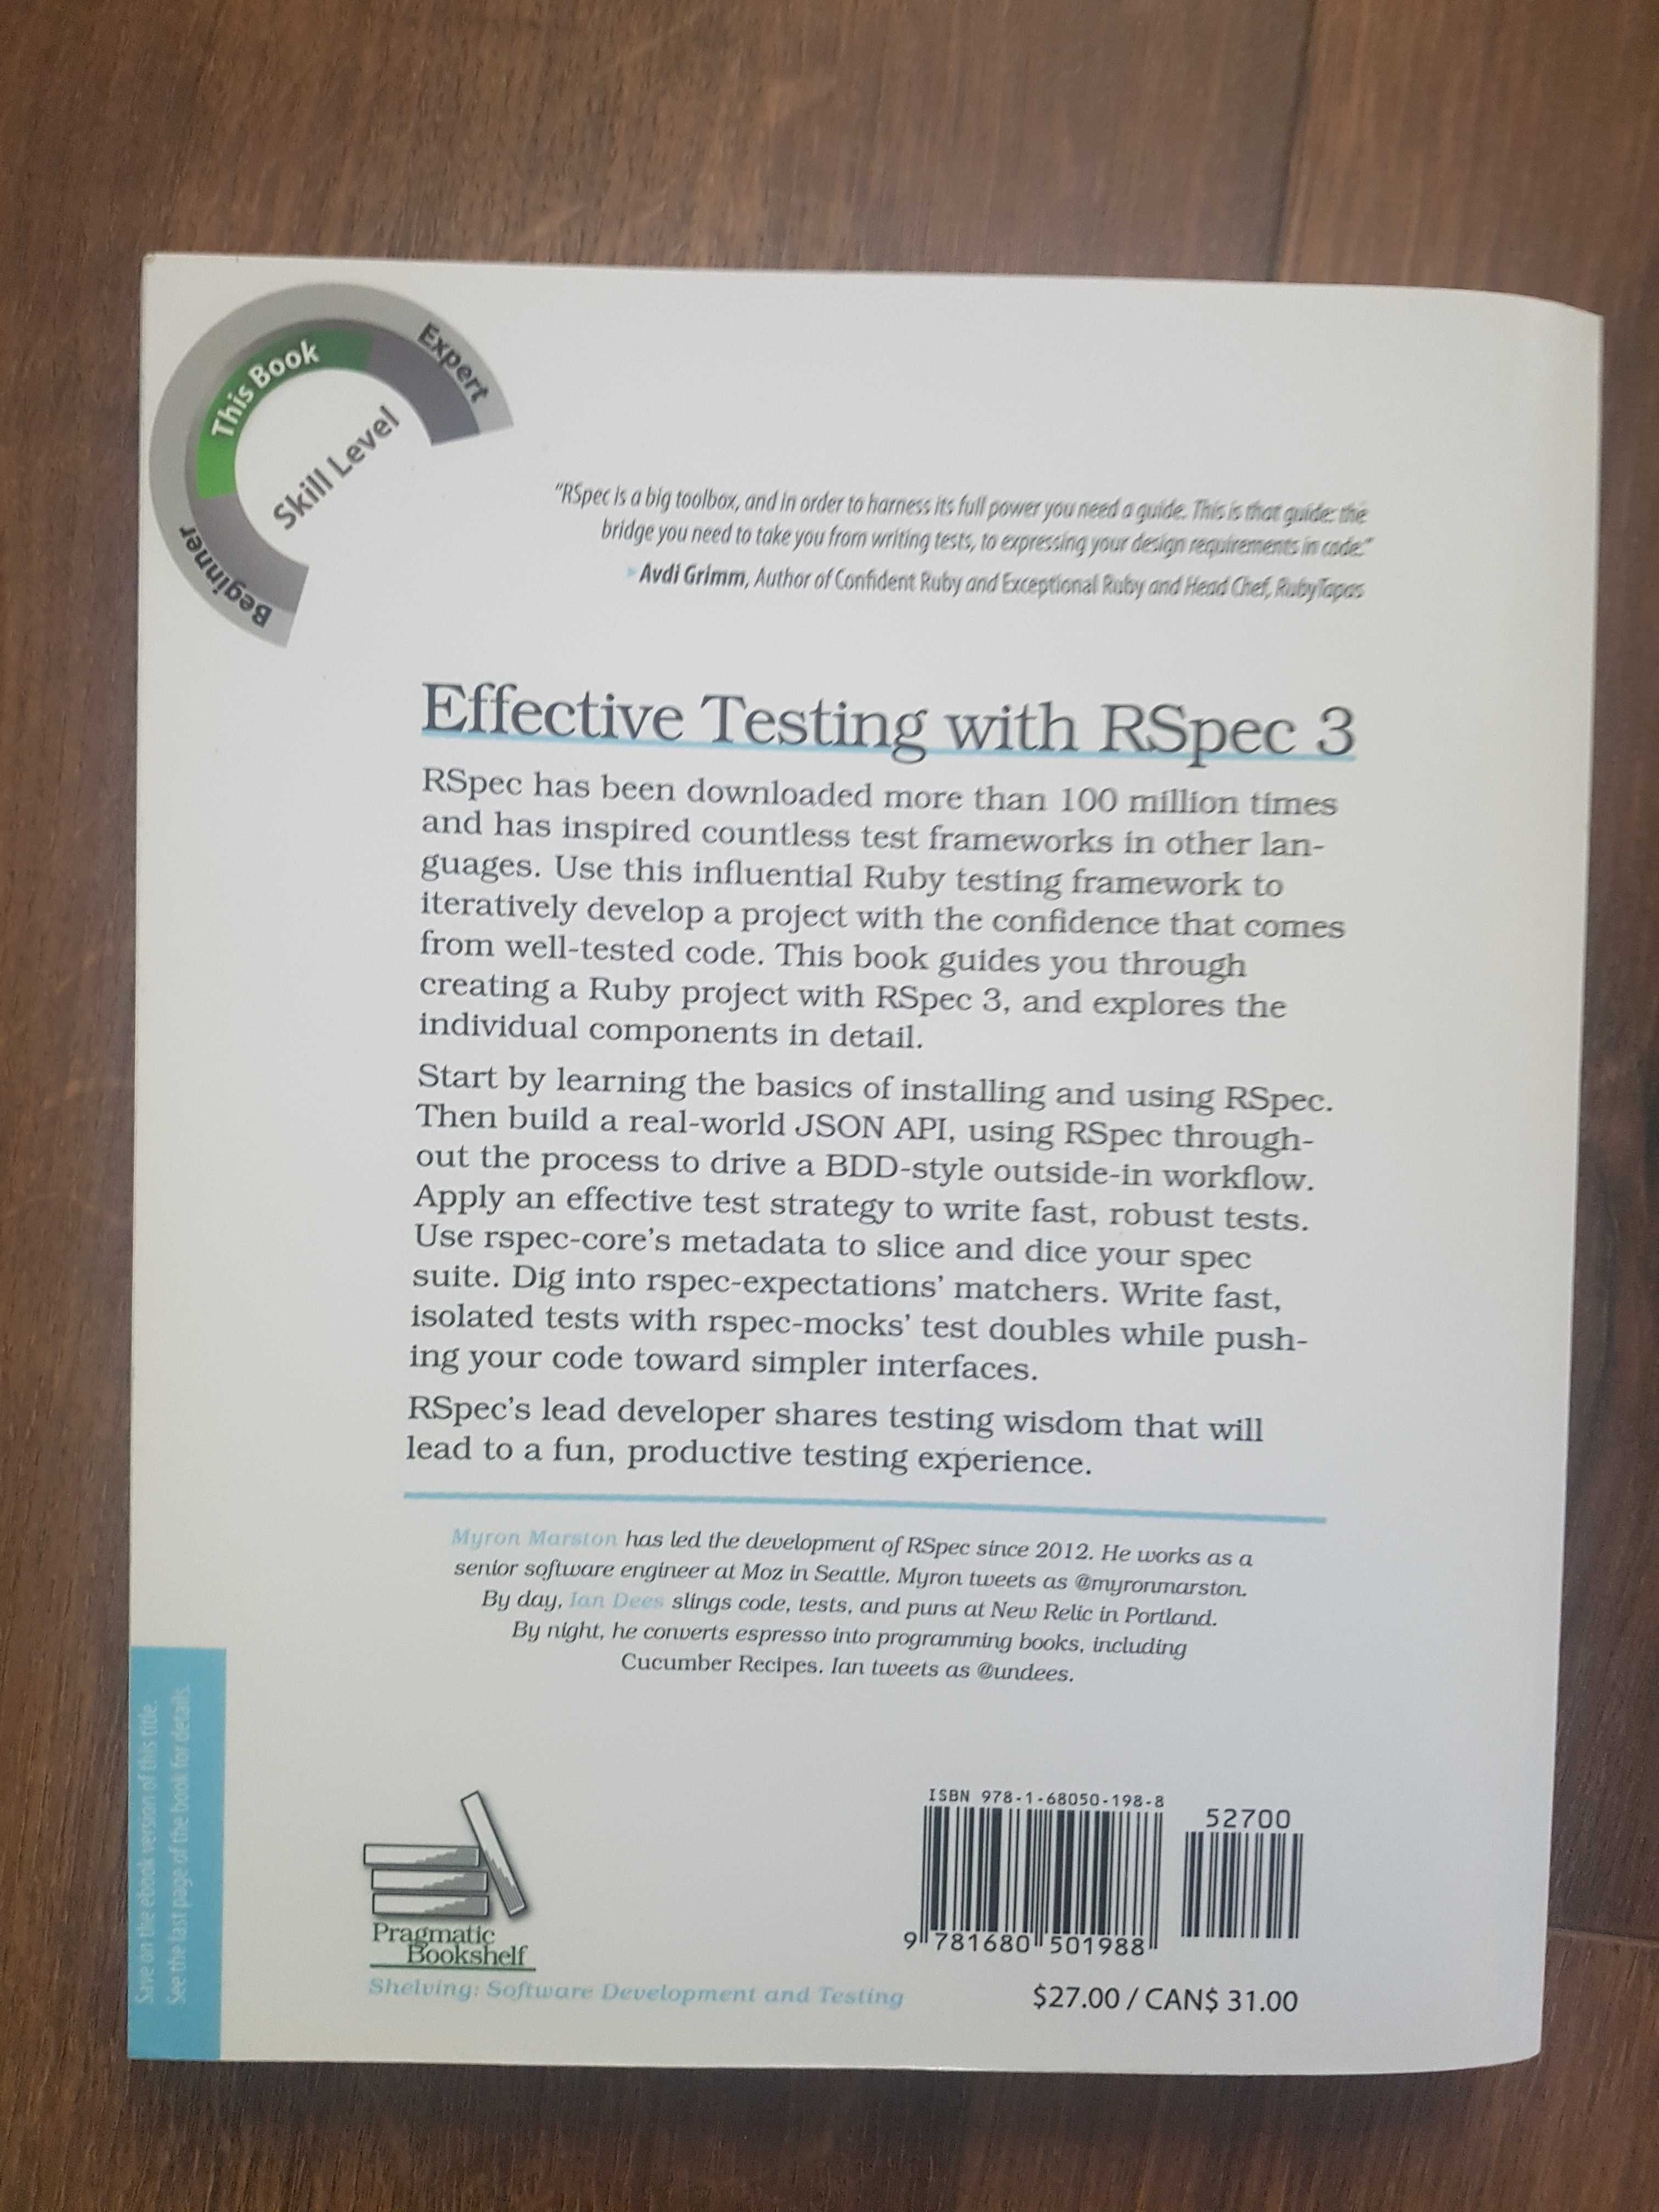 Effective testing with Rspec 3